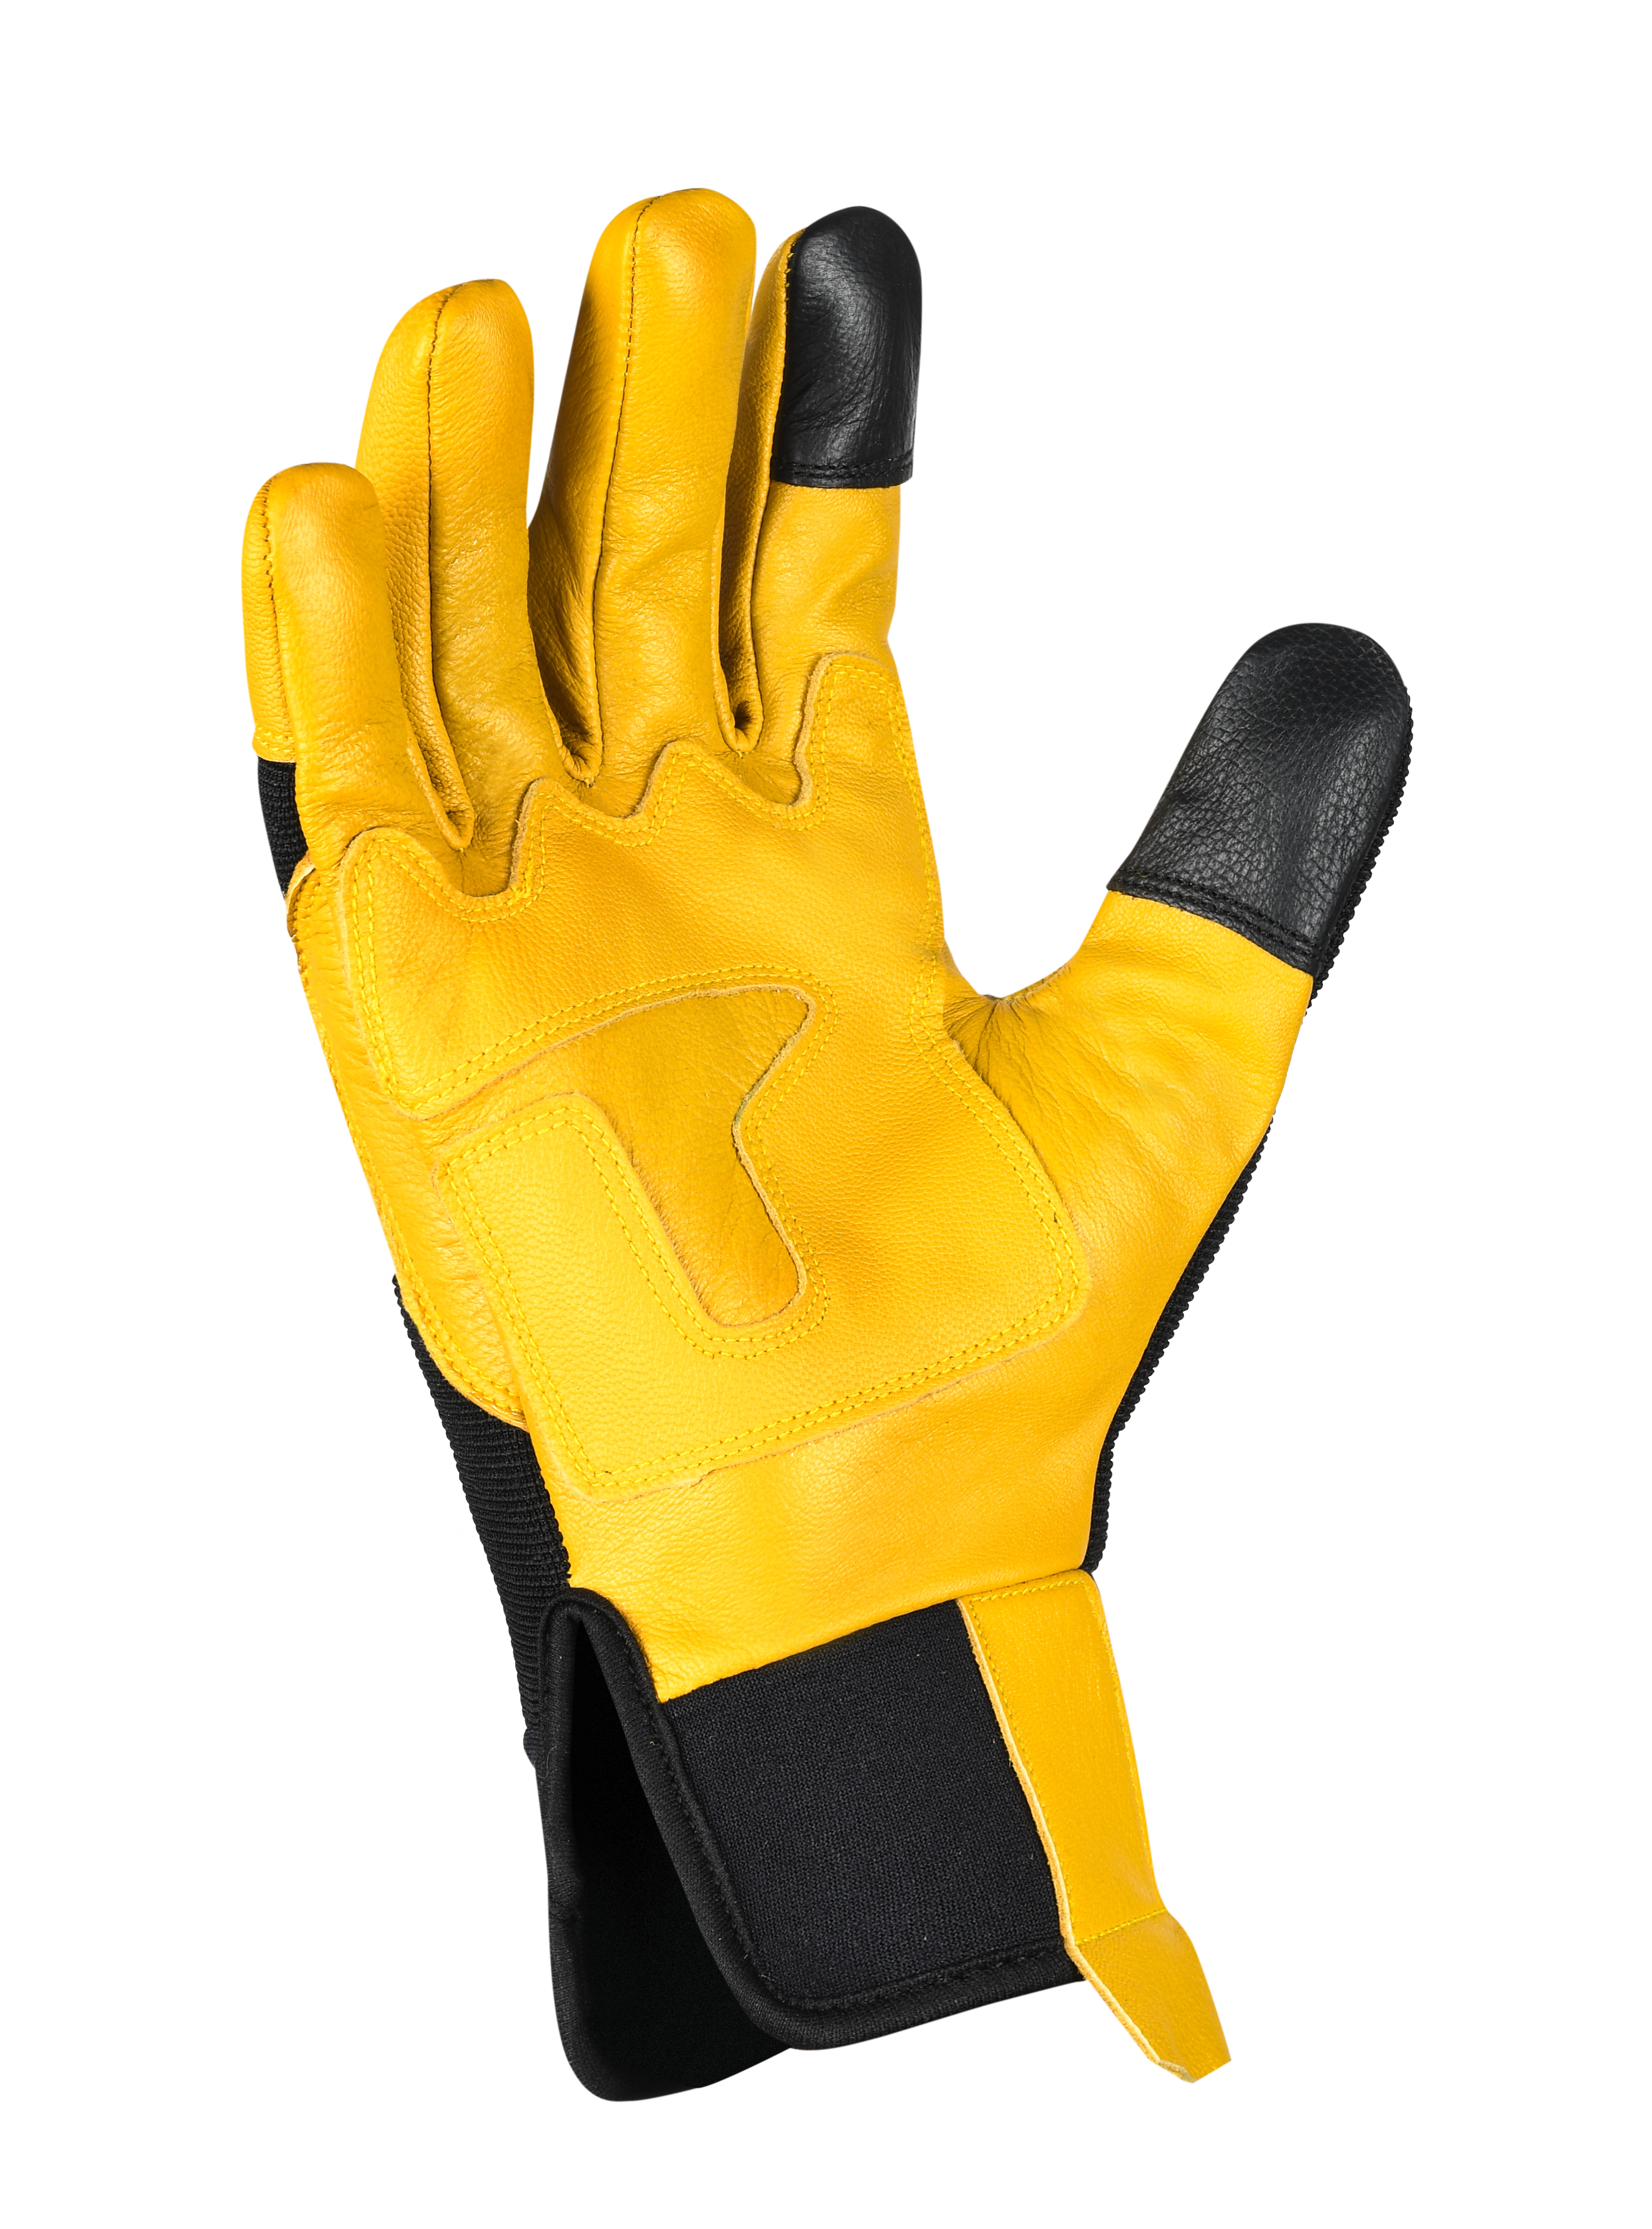 Discover the Ultra Guard Black and Yellow Safety Glove – a vibrant blend of unique style and robust protection. With well-padded, thick, and durable leather construction, this glove is your versatile companion for various work types. From gardening to DIY, labor to building, and ground work, experience comfort and strength in every task with Ultra Guard.